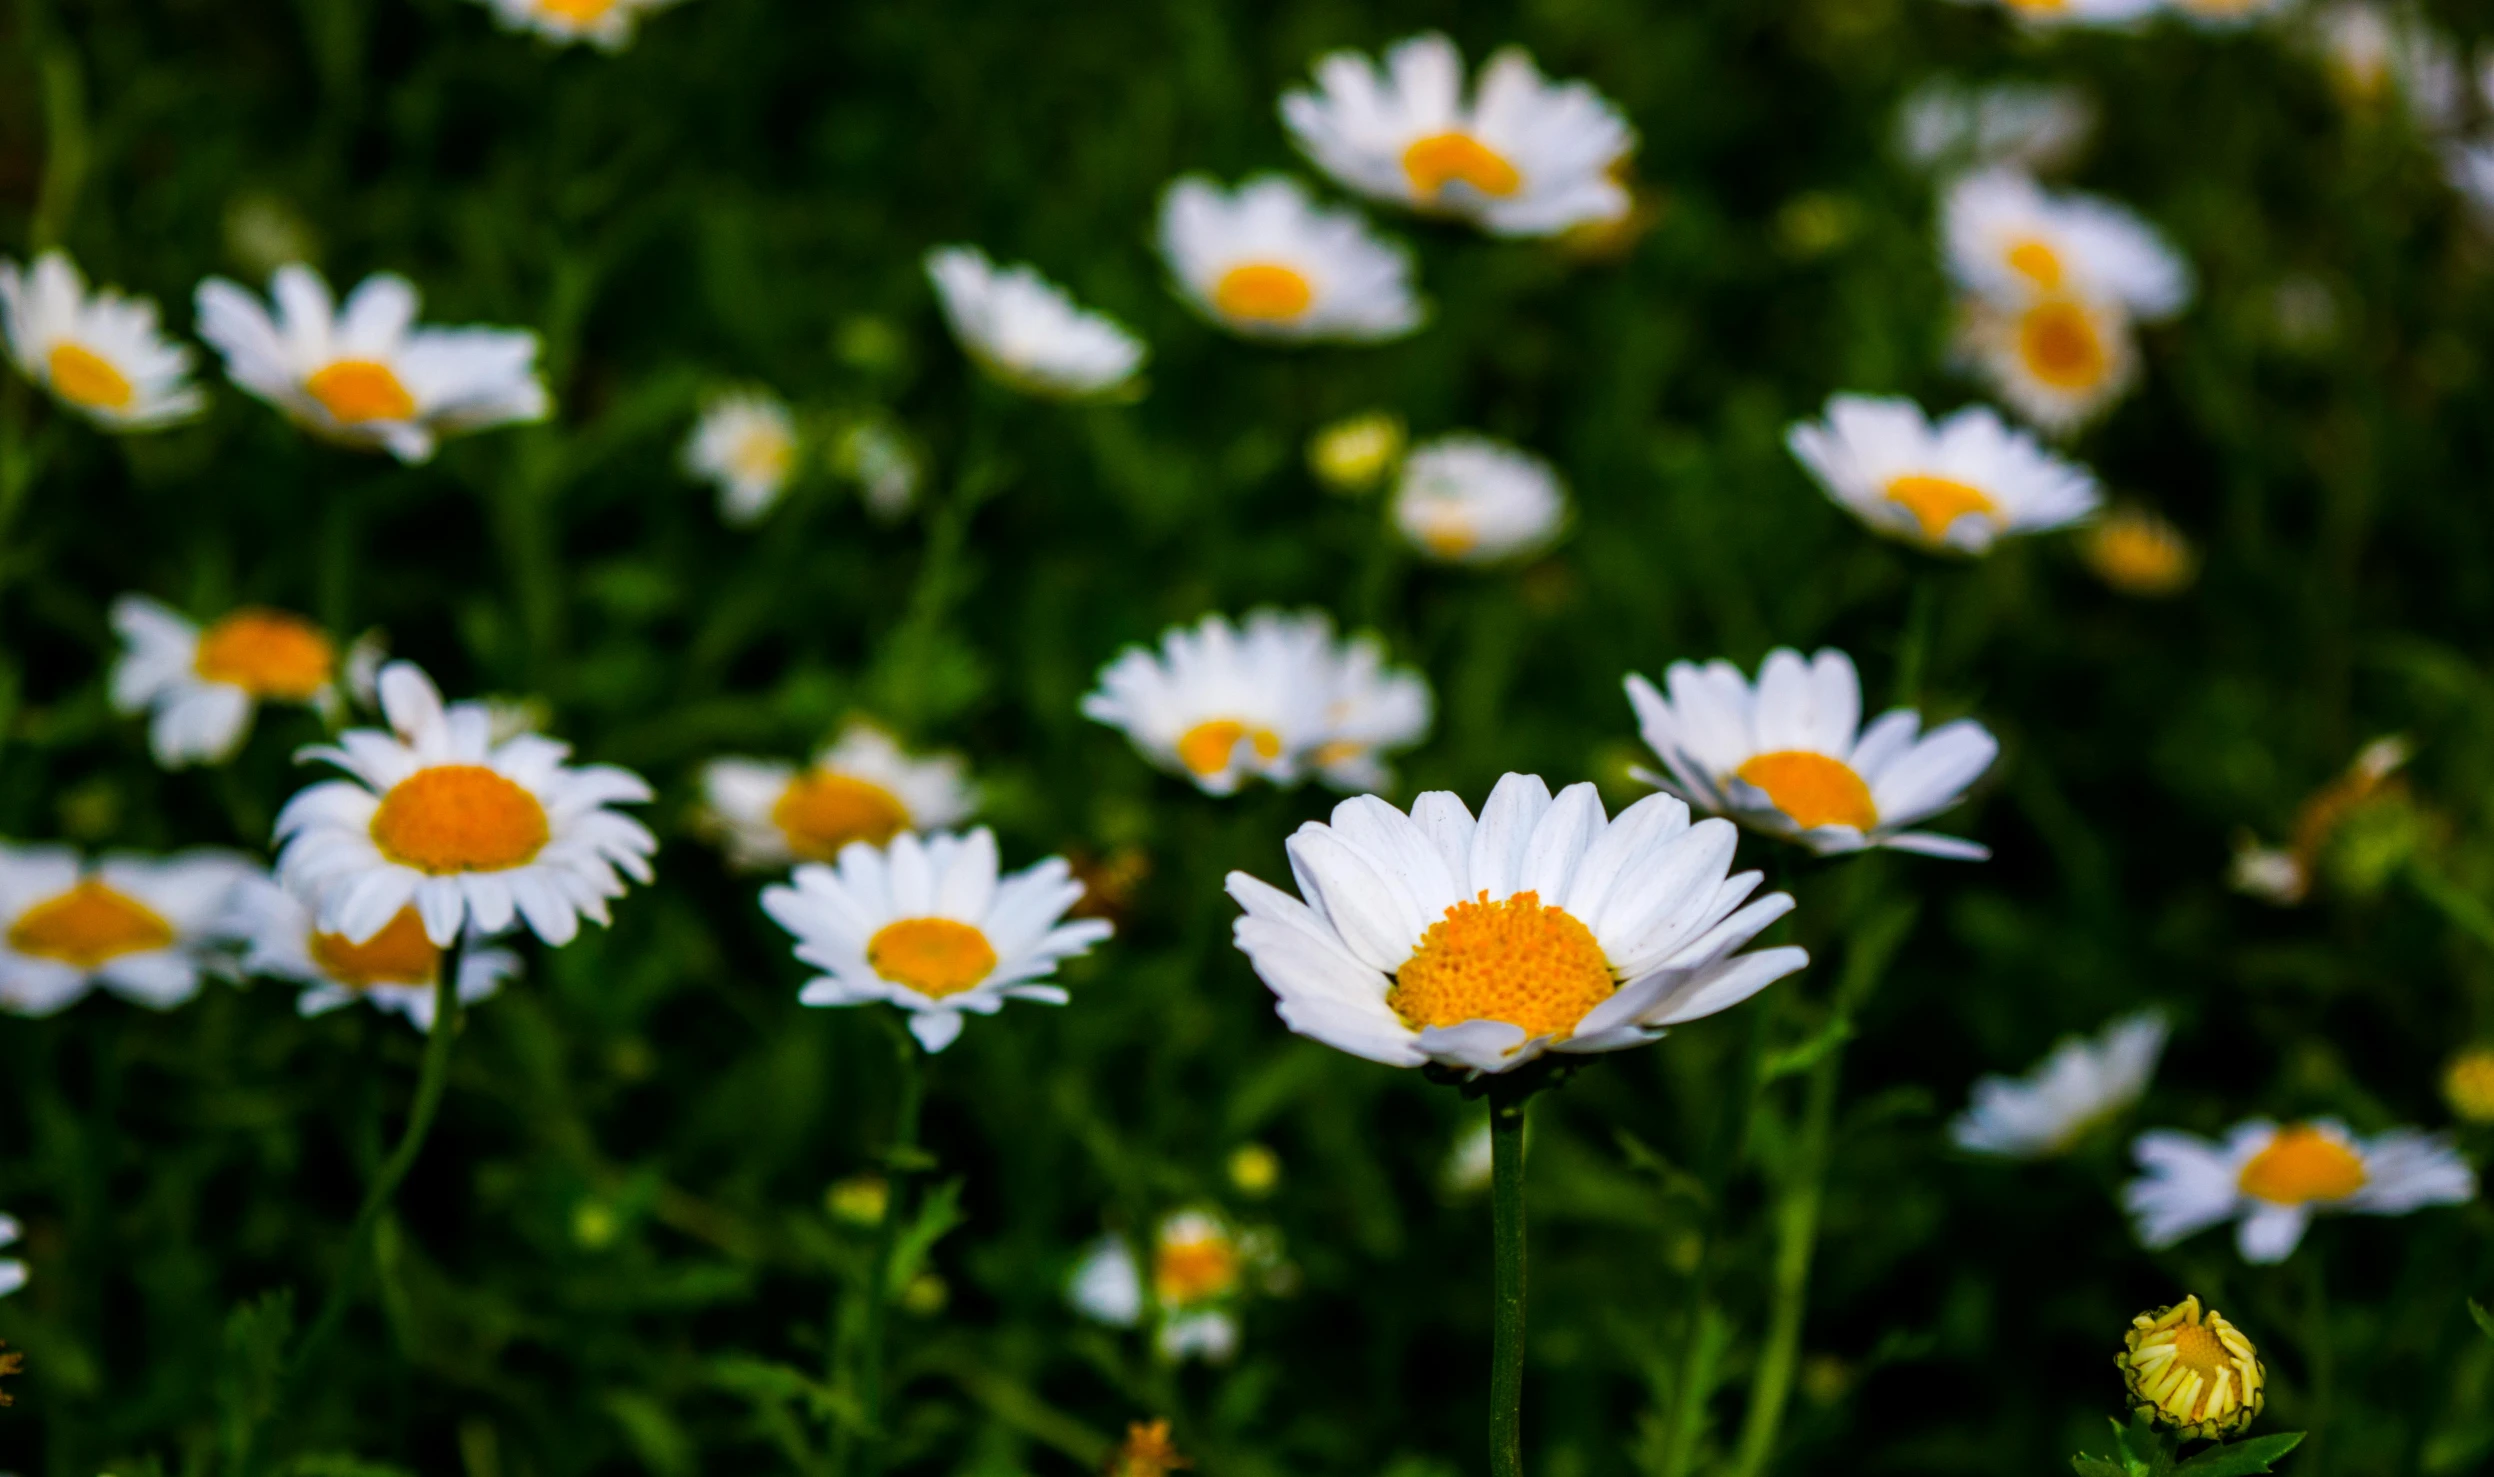 a field full of white and yellow flowers, an album cover, pexels contest winner, fan favorite, daisy, gardening, white and orange